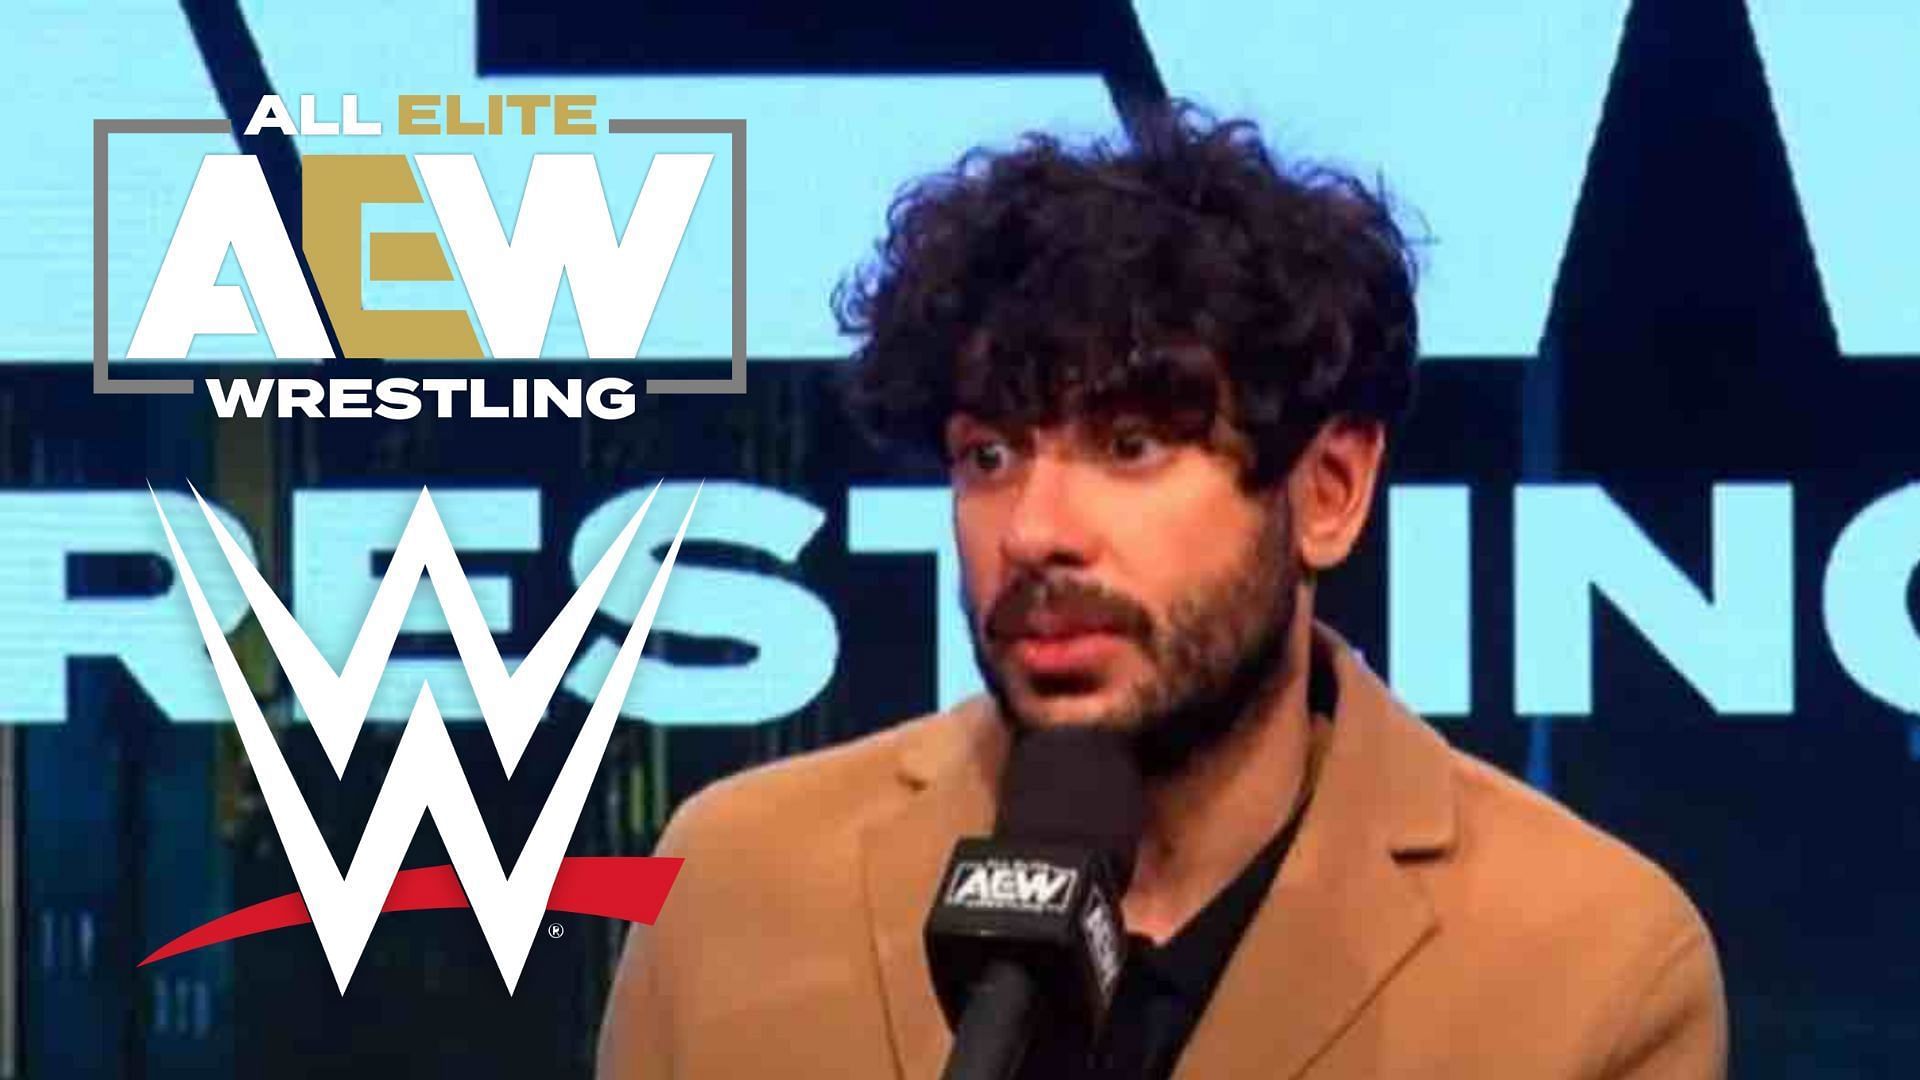 Tony Khan is the President of AEW and ROH.